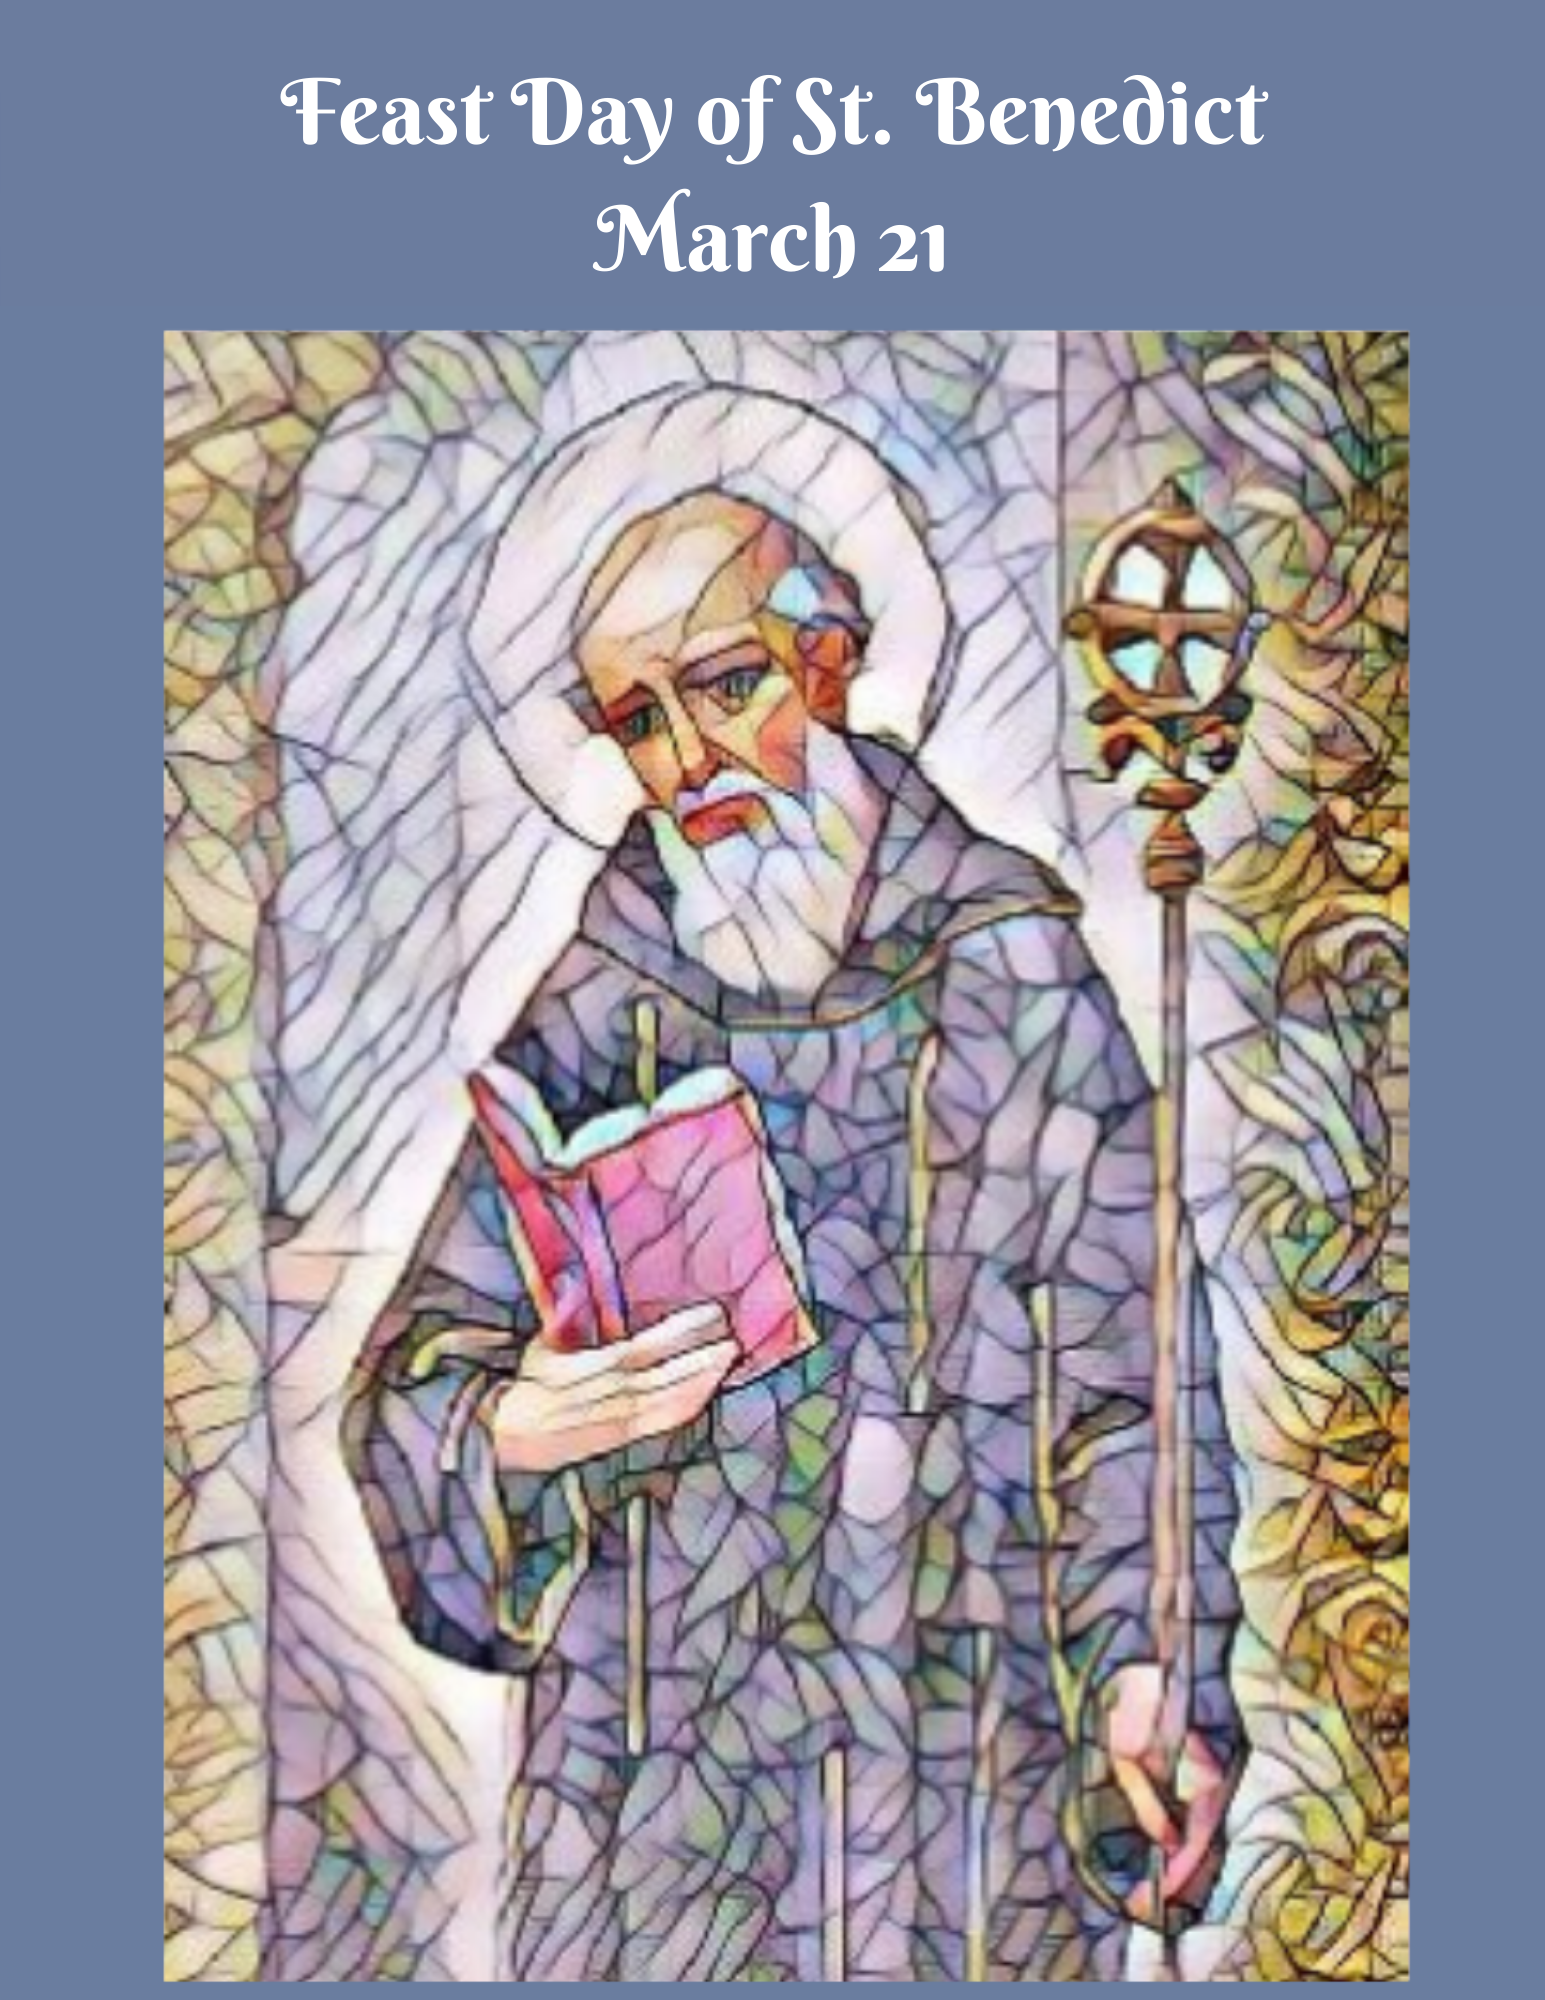 Feast Day of St. Benedict